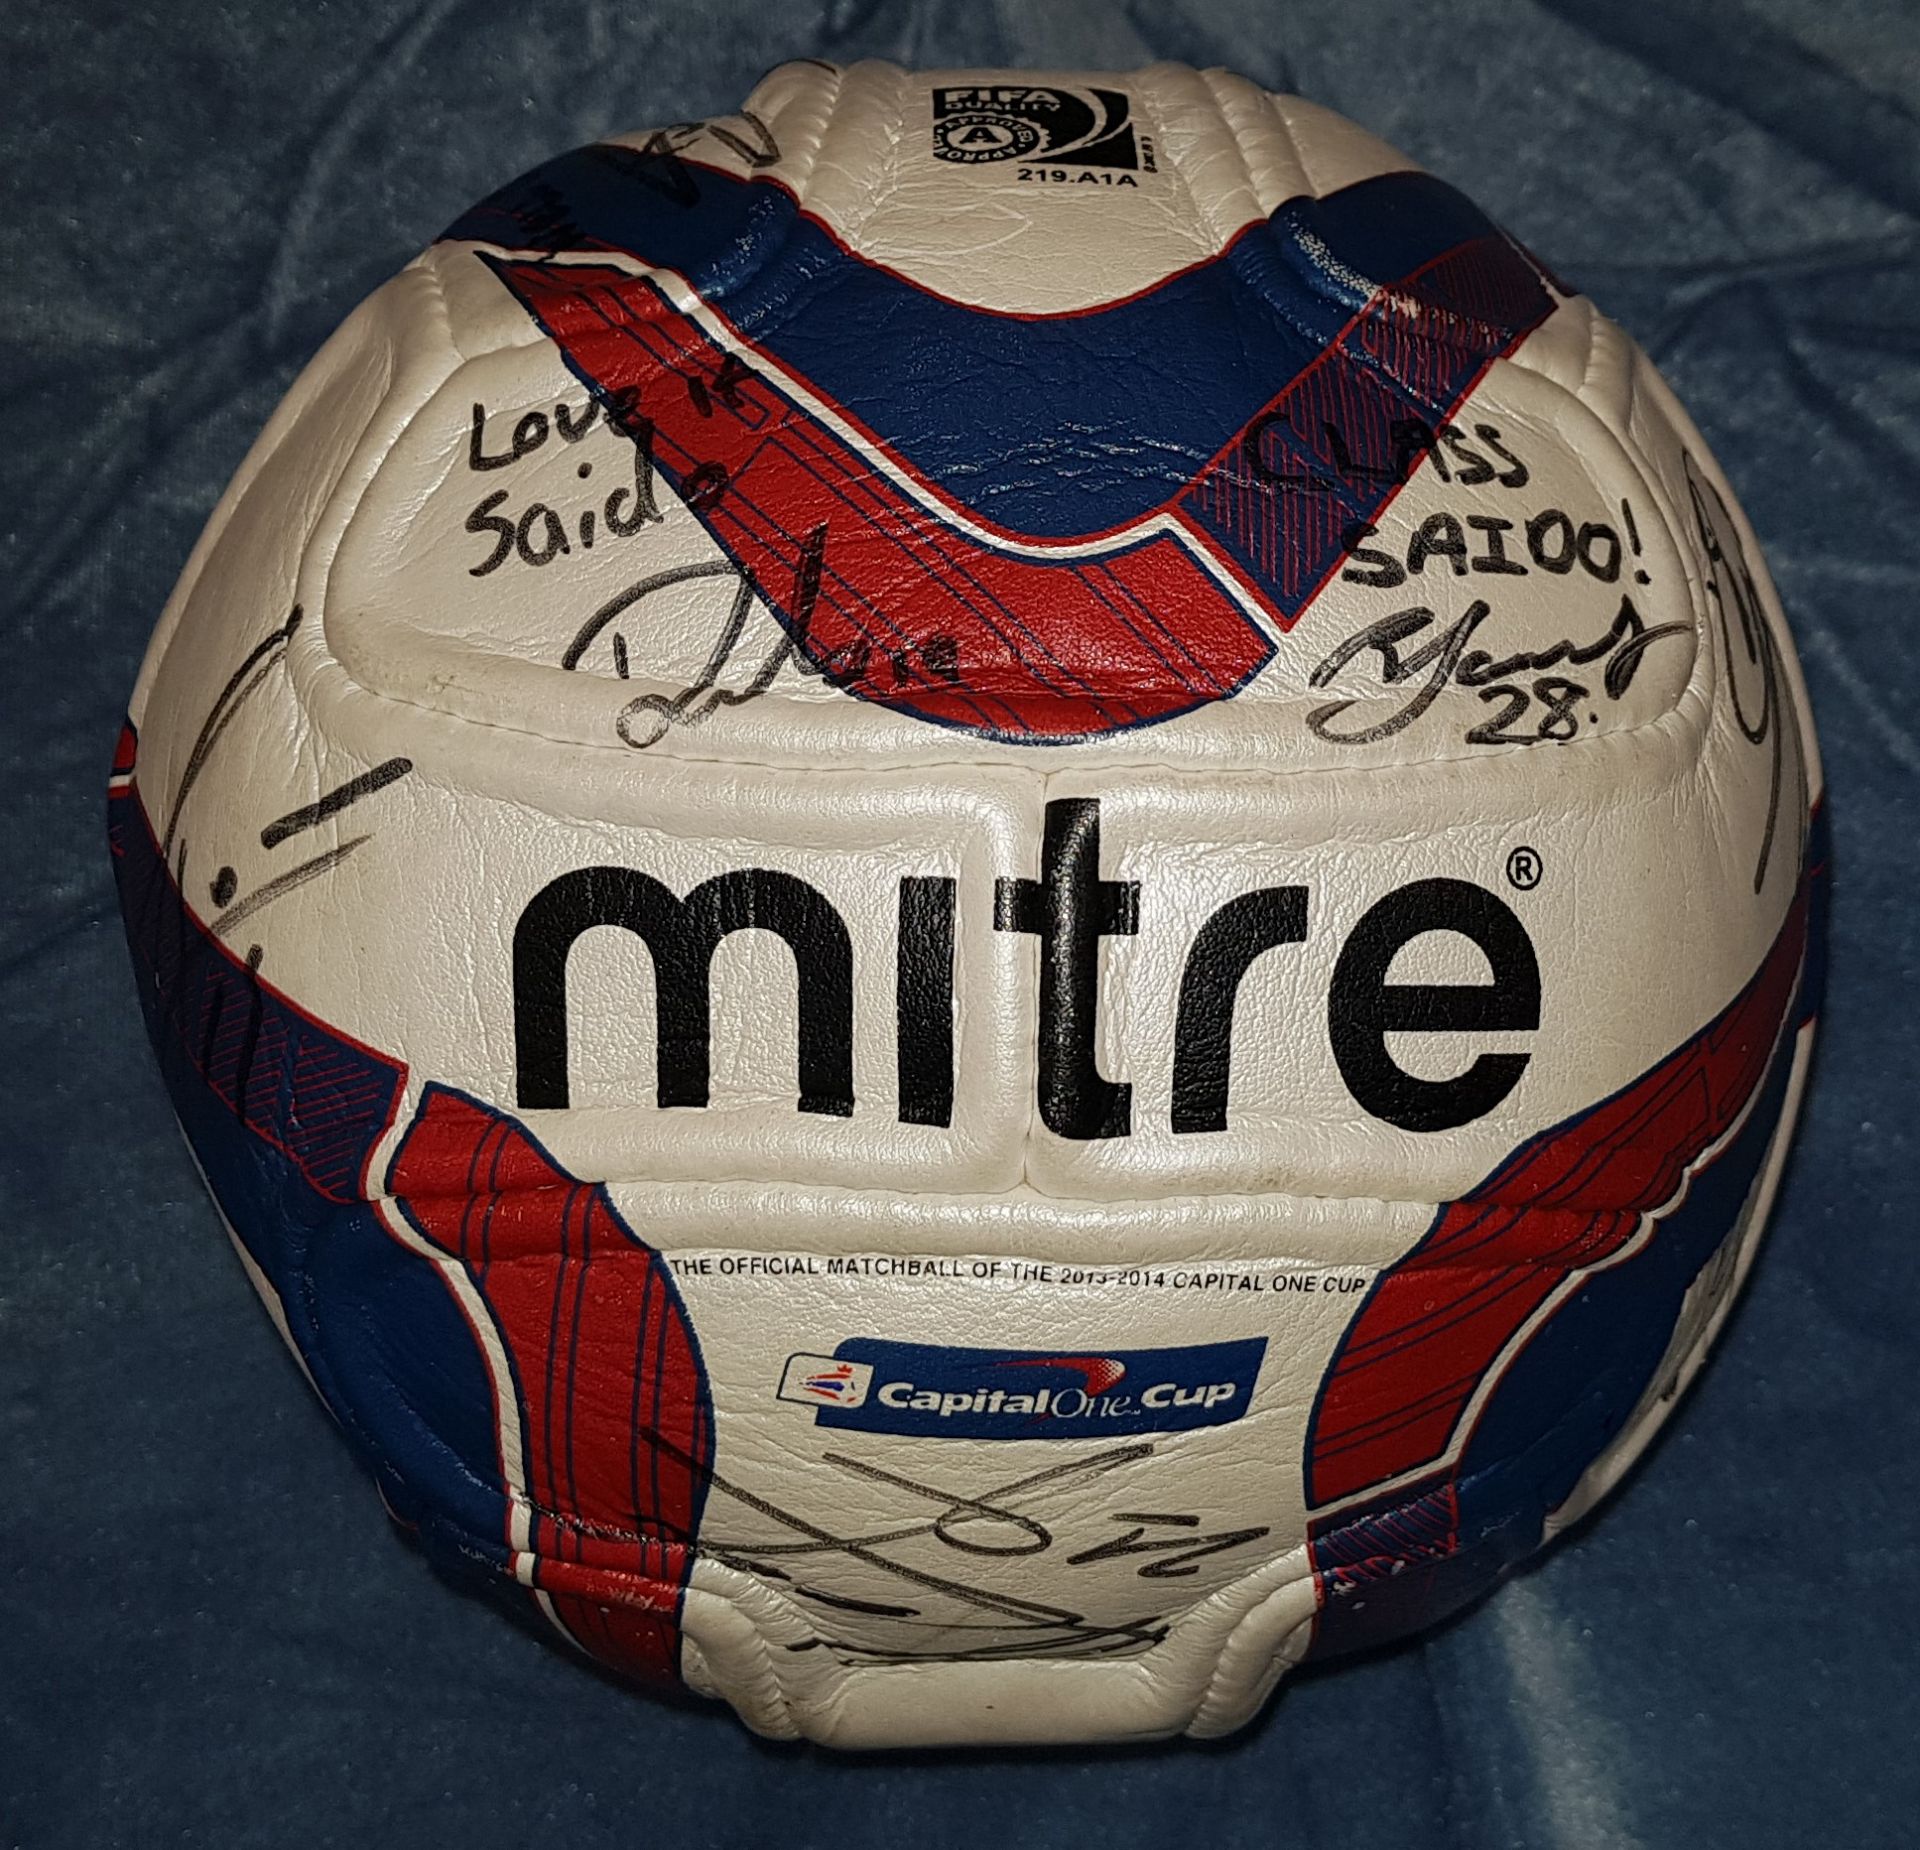 MITRE SIZE 5 FOOTBALL FIFA QUALITY CAPITAL ONE CUP WITH NUMEROUS UNKNOWN SIGNATURES (SEE IMAGES) - Image 3 of 4